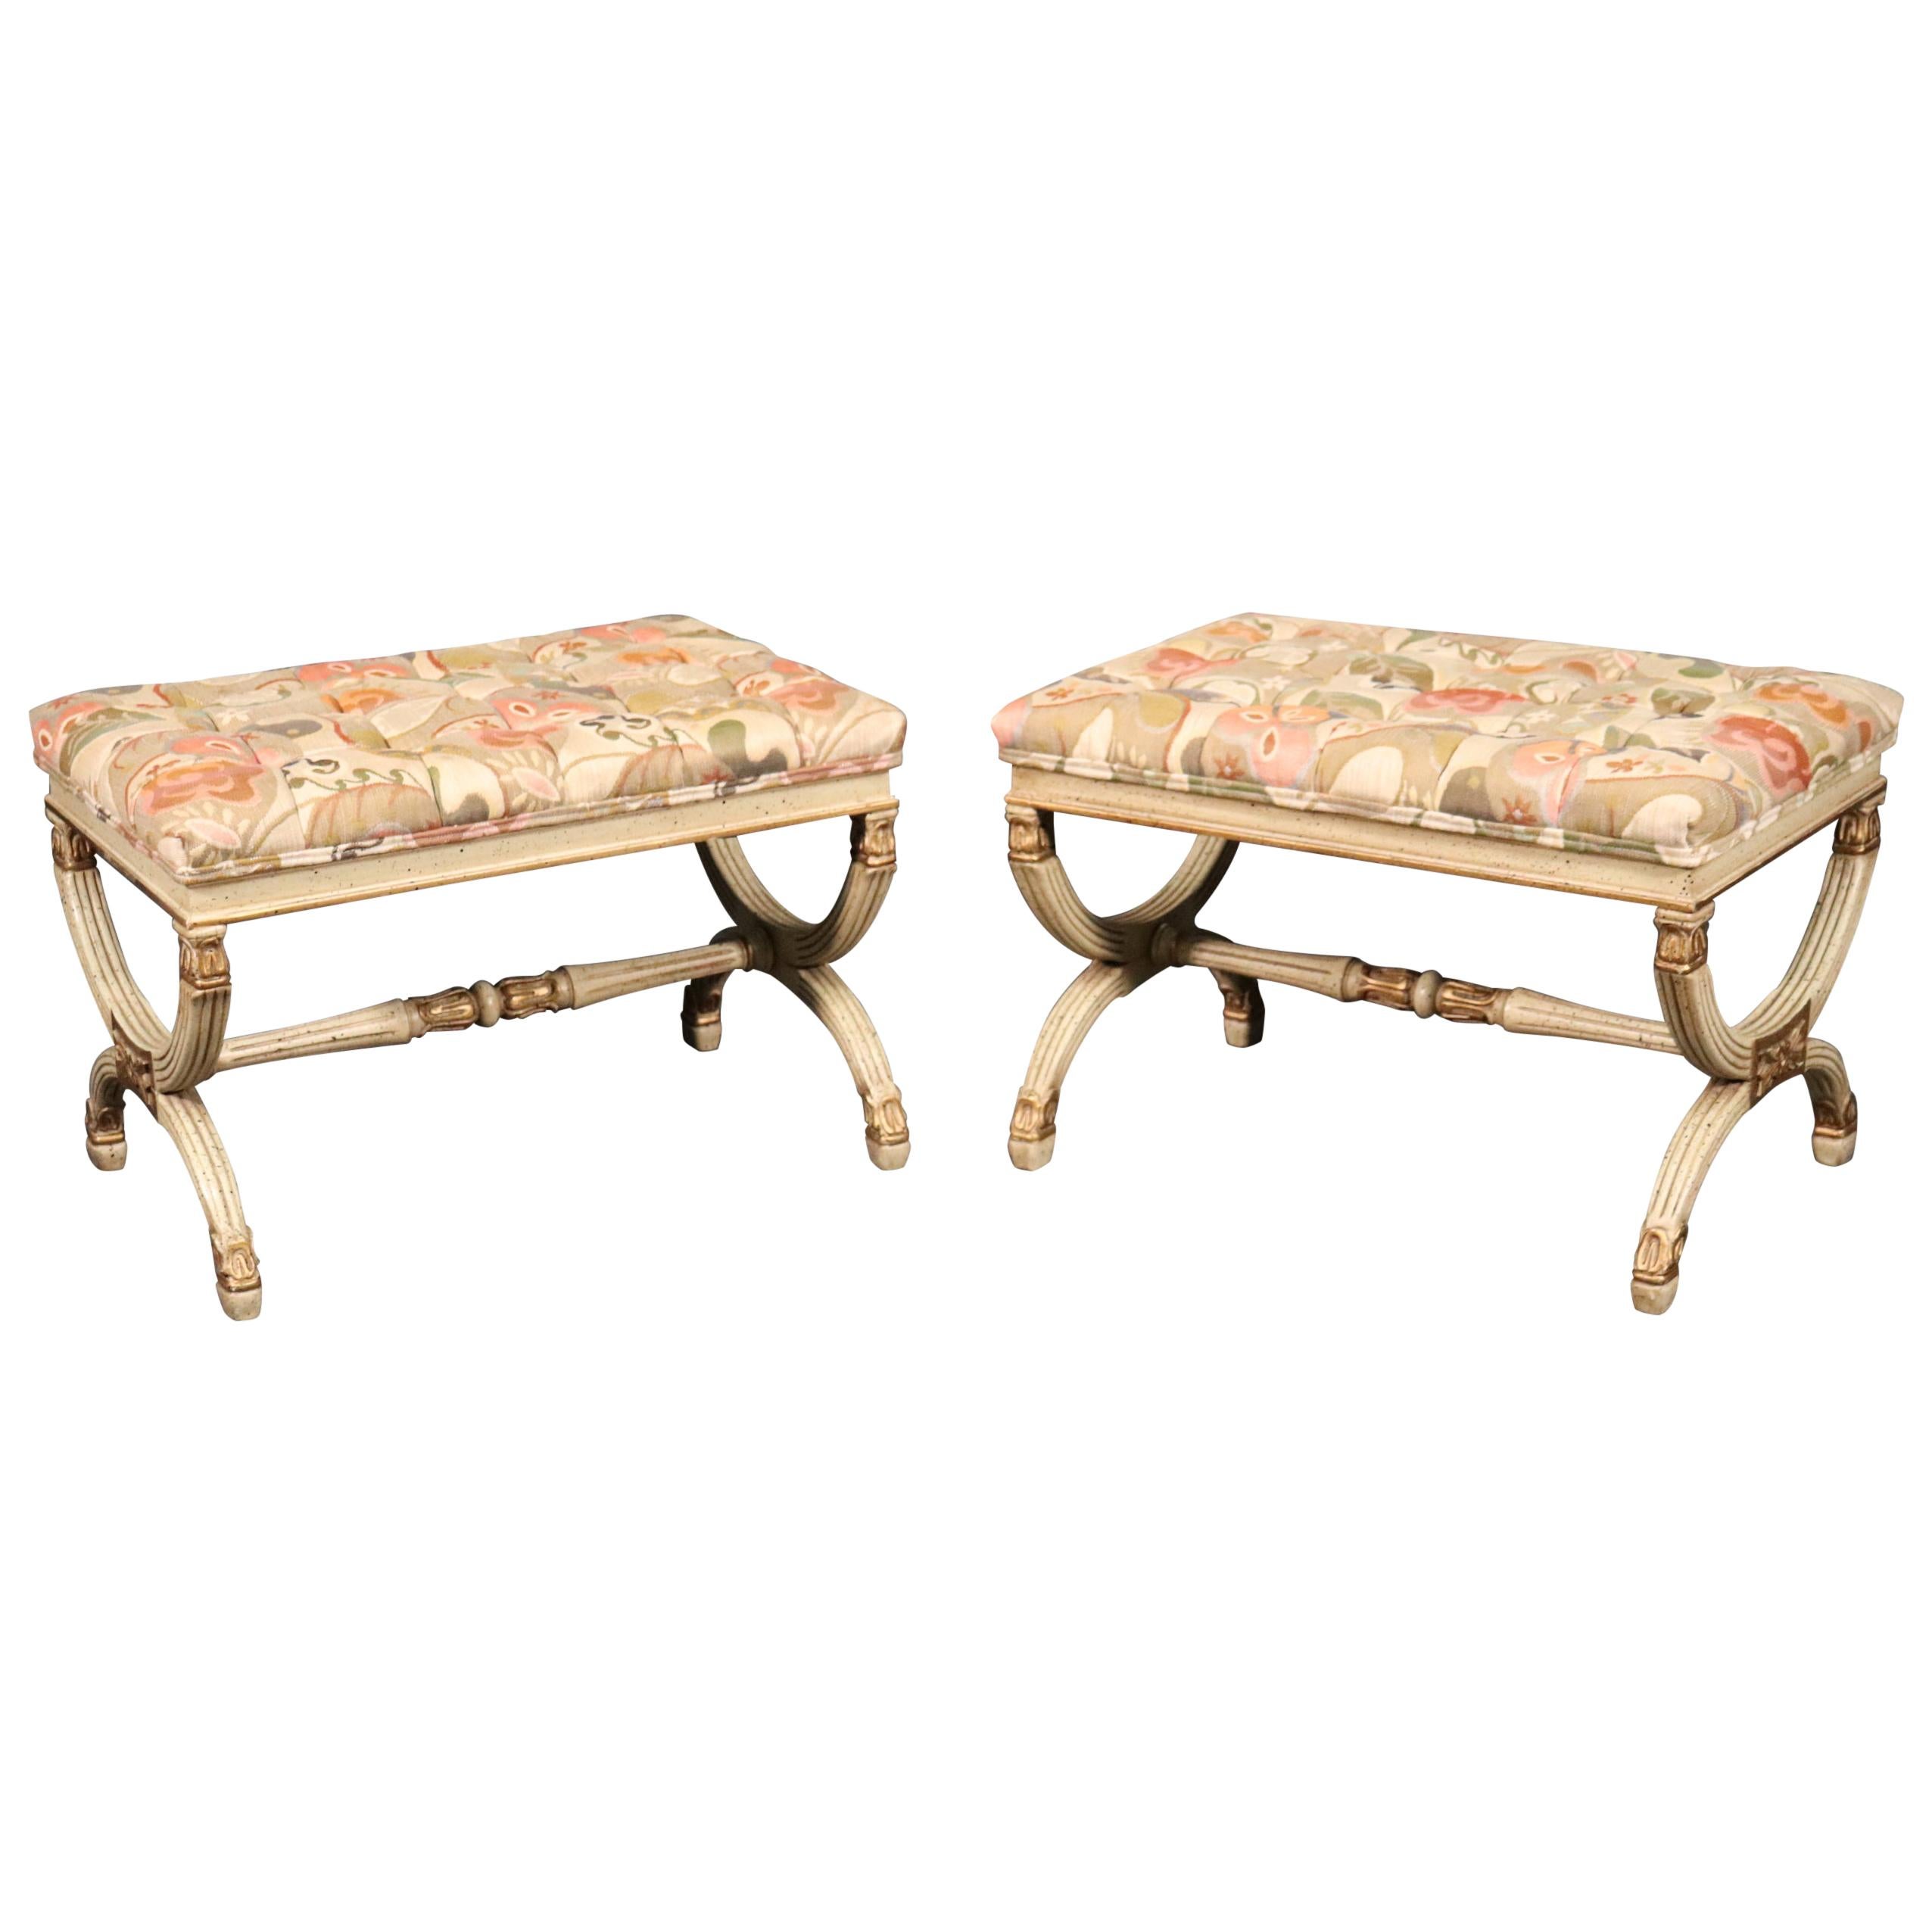 Pair of Antique White Painted Louis XVI Style Ottomans Benches Stools circa 1950